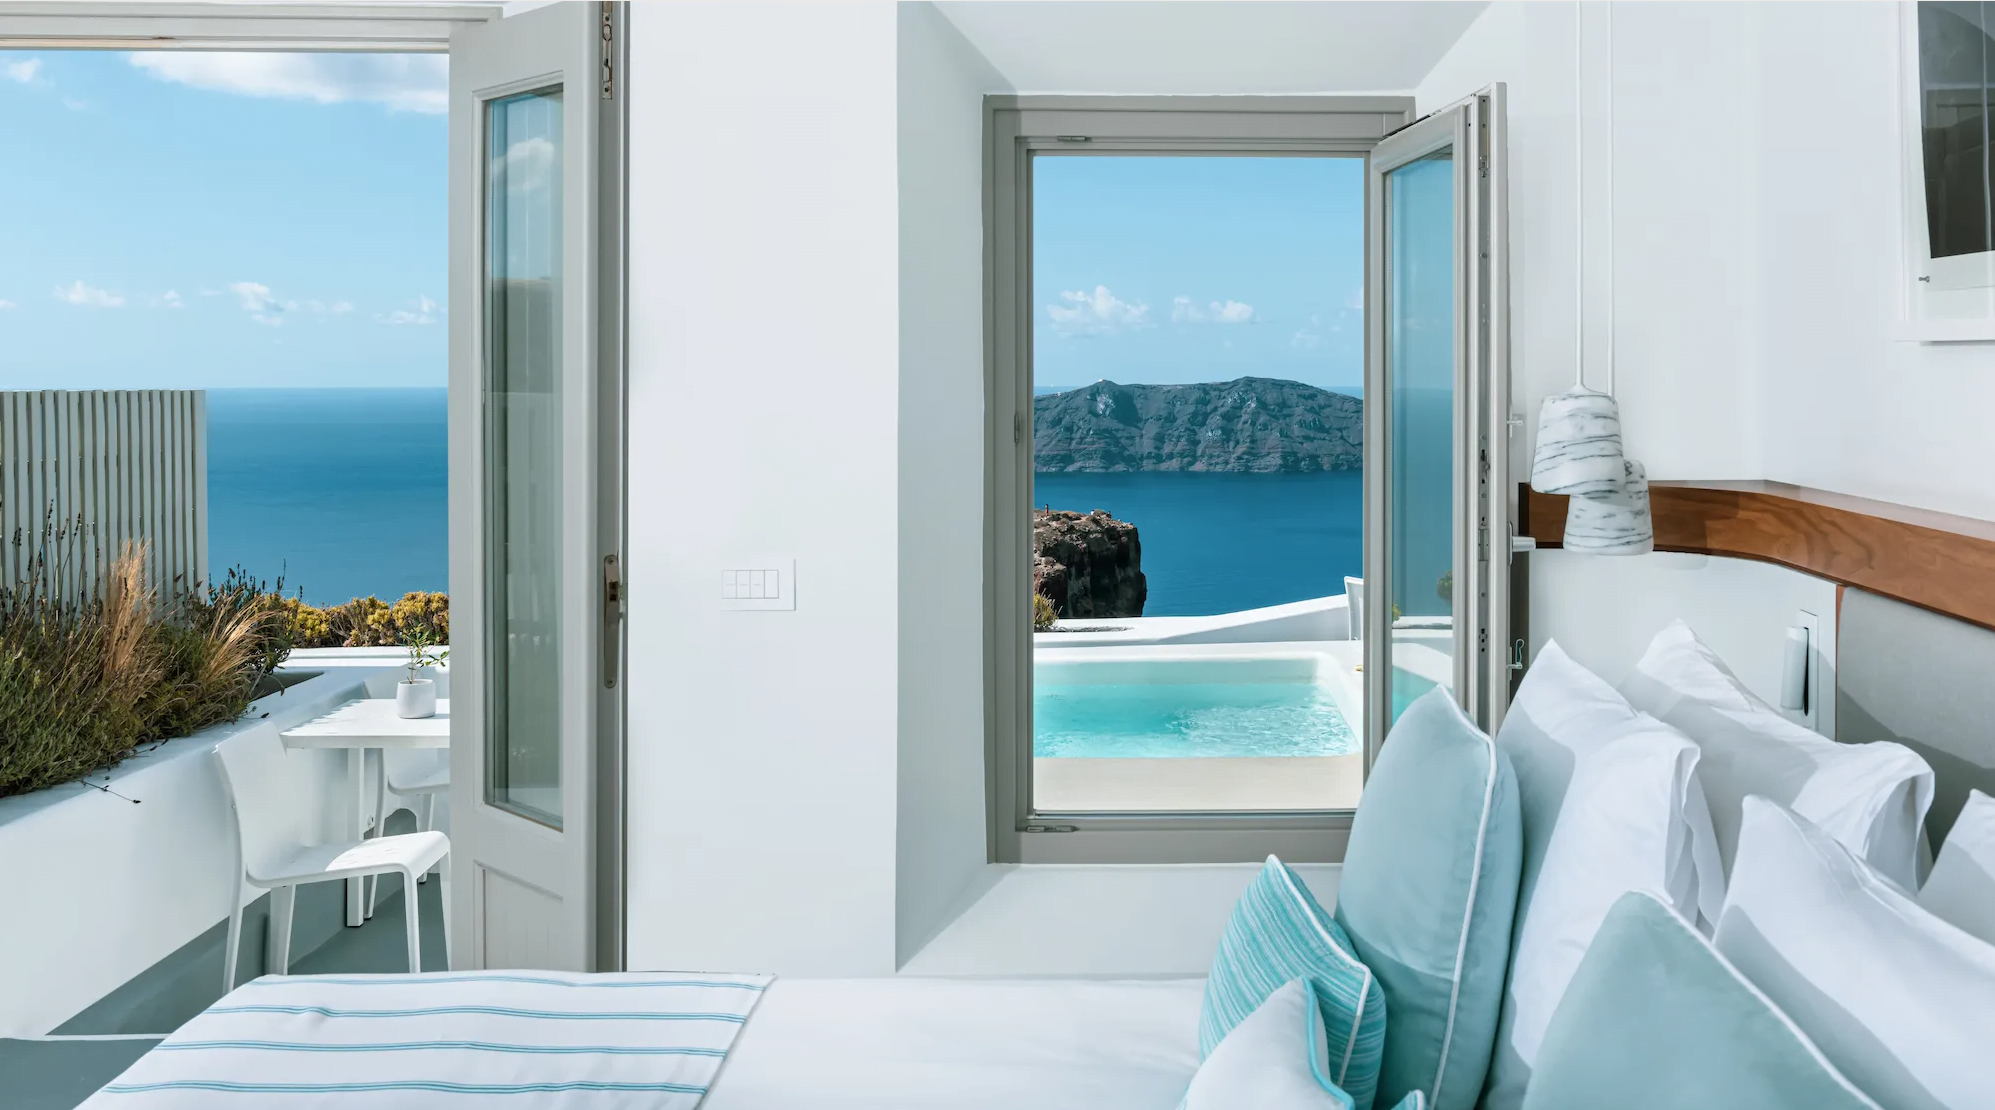 View from a bedroom through open doors to a private balcony with a pool overlooking the sea and a distant island.